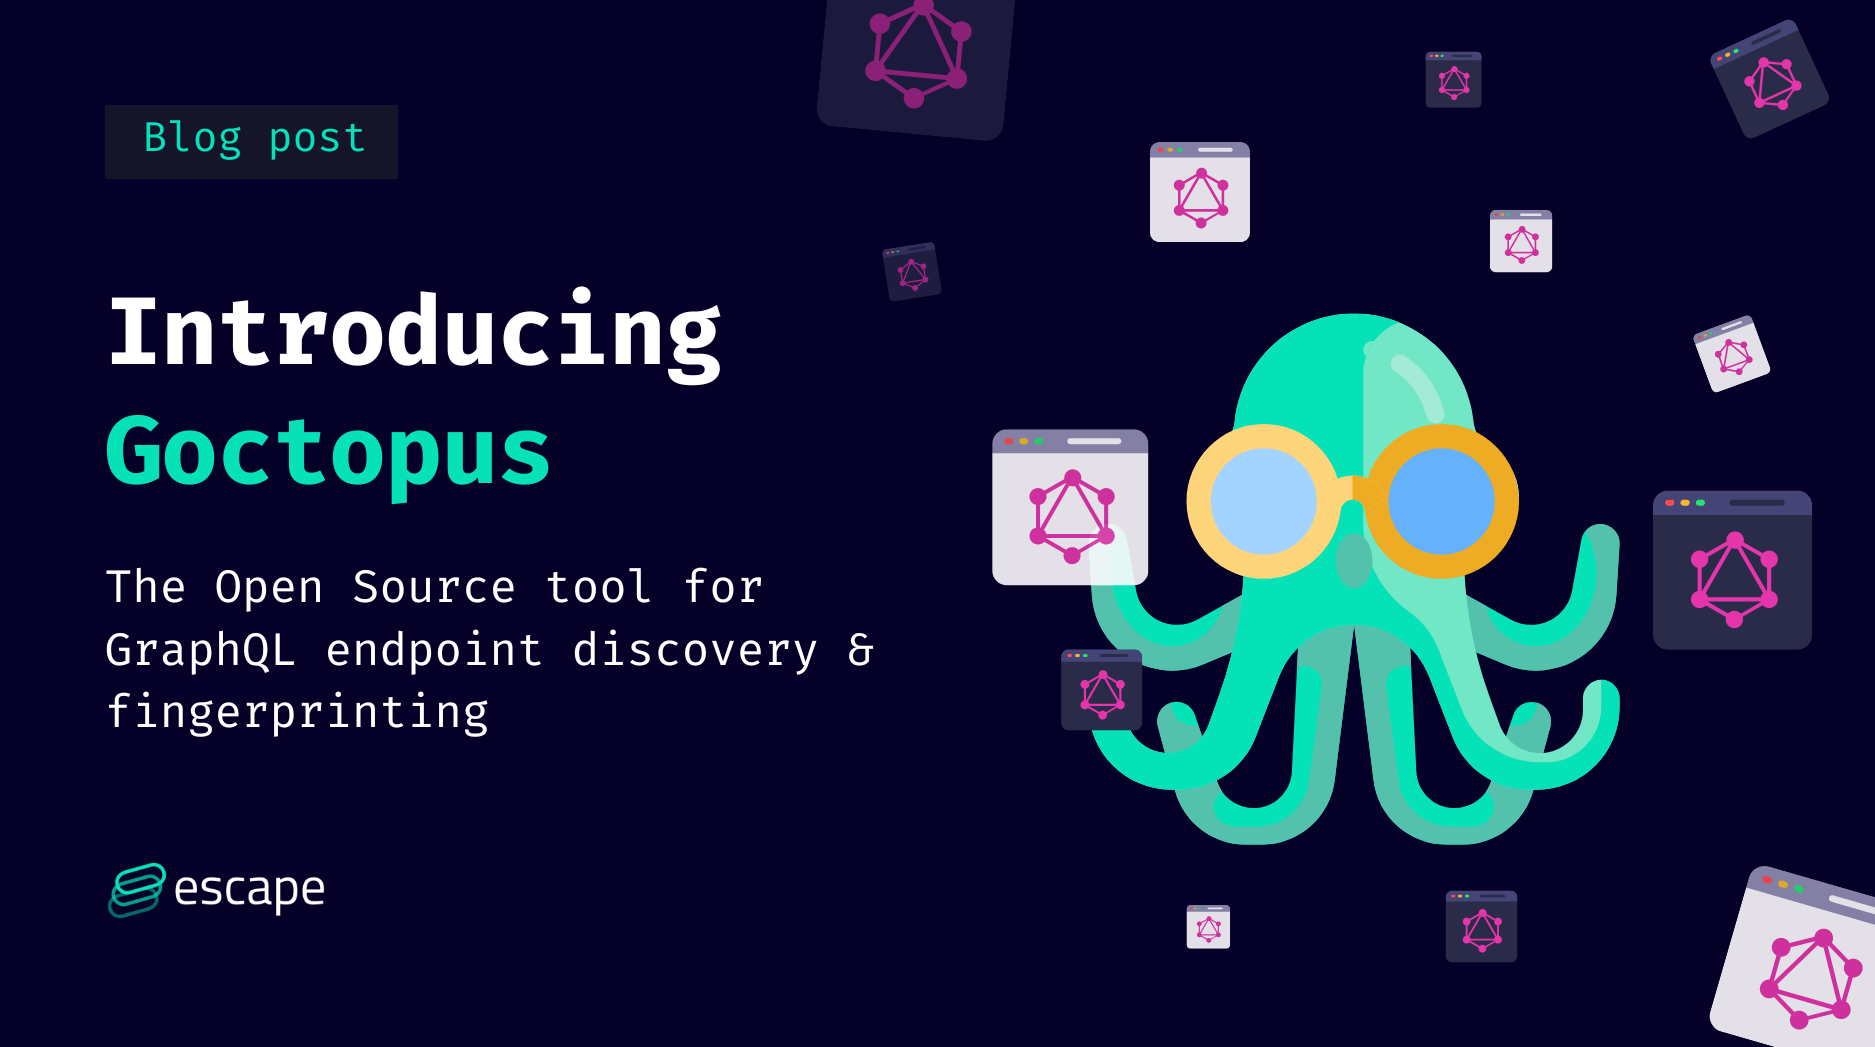 Introducing Goctopus: Open Source GraphQL endpoint discovery & fingerprinting tool